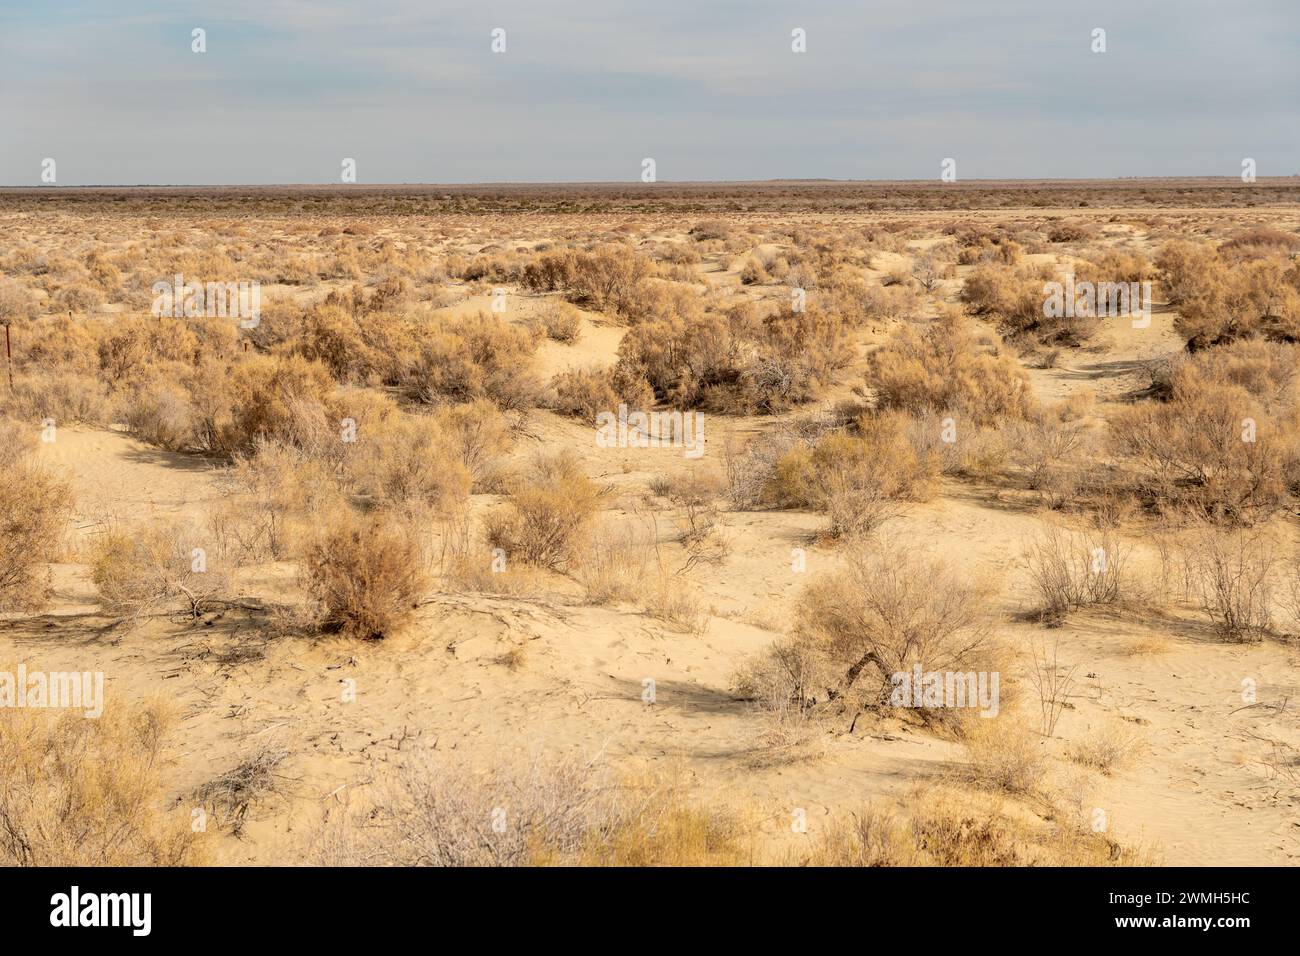 Consequences of Aral sea disaster. Steppe and sand on the site of the former bottom of the Aral sea. Kazakhstan, Uzbekistan Stock Photo